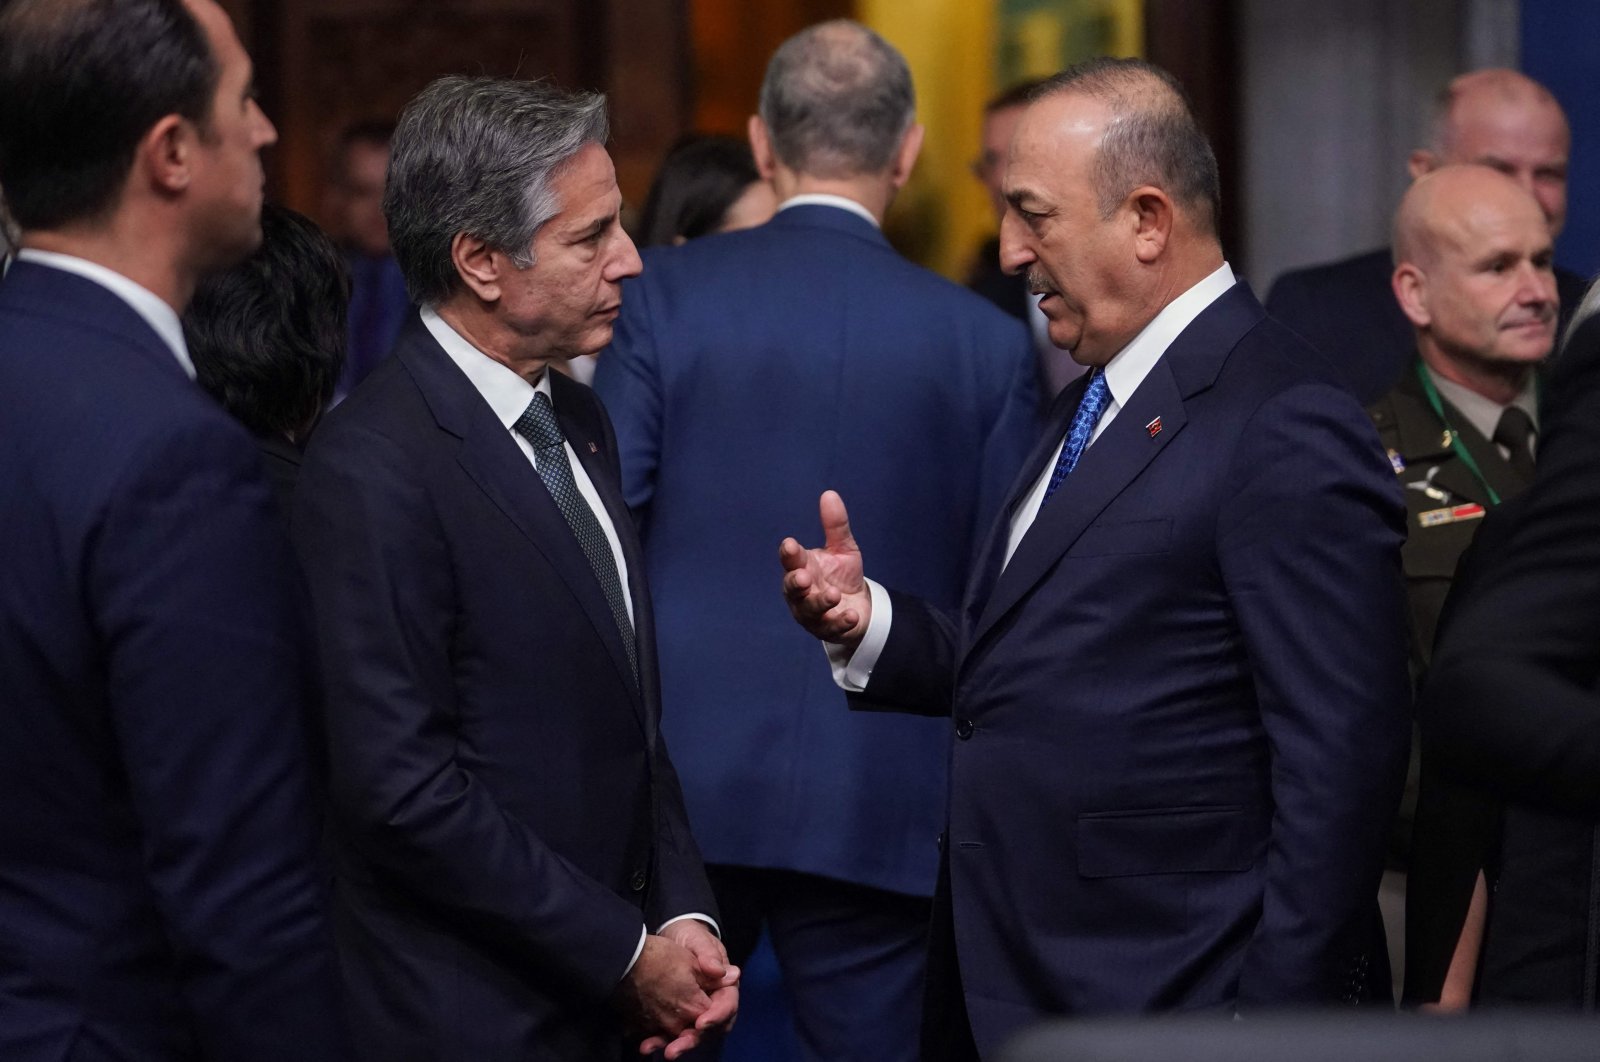 Foreign Minister Mevlüt Çavuşoğlu (R) and U.S. Secretary of State Antony Blinken (L) talk ahead of a meeting of NATO Foreign Ministers in Bucharest, Romania, Nov. 29, 2022. (AFP Photo)